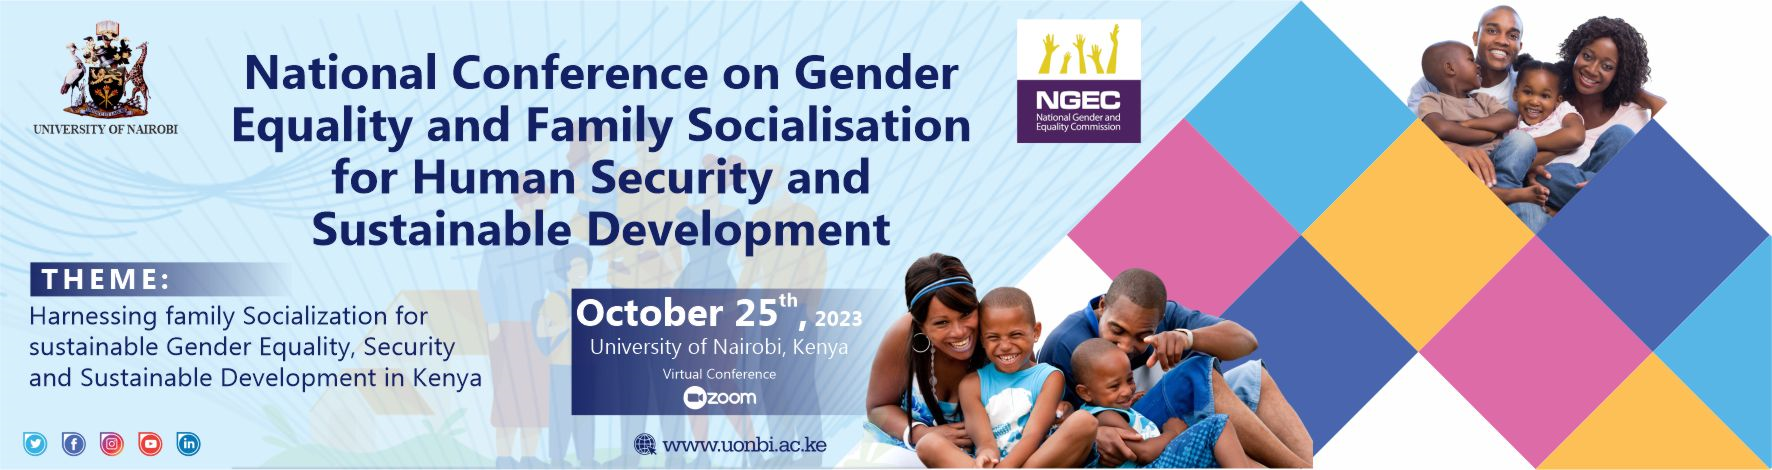 National conference on gender equality and family socialization